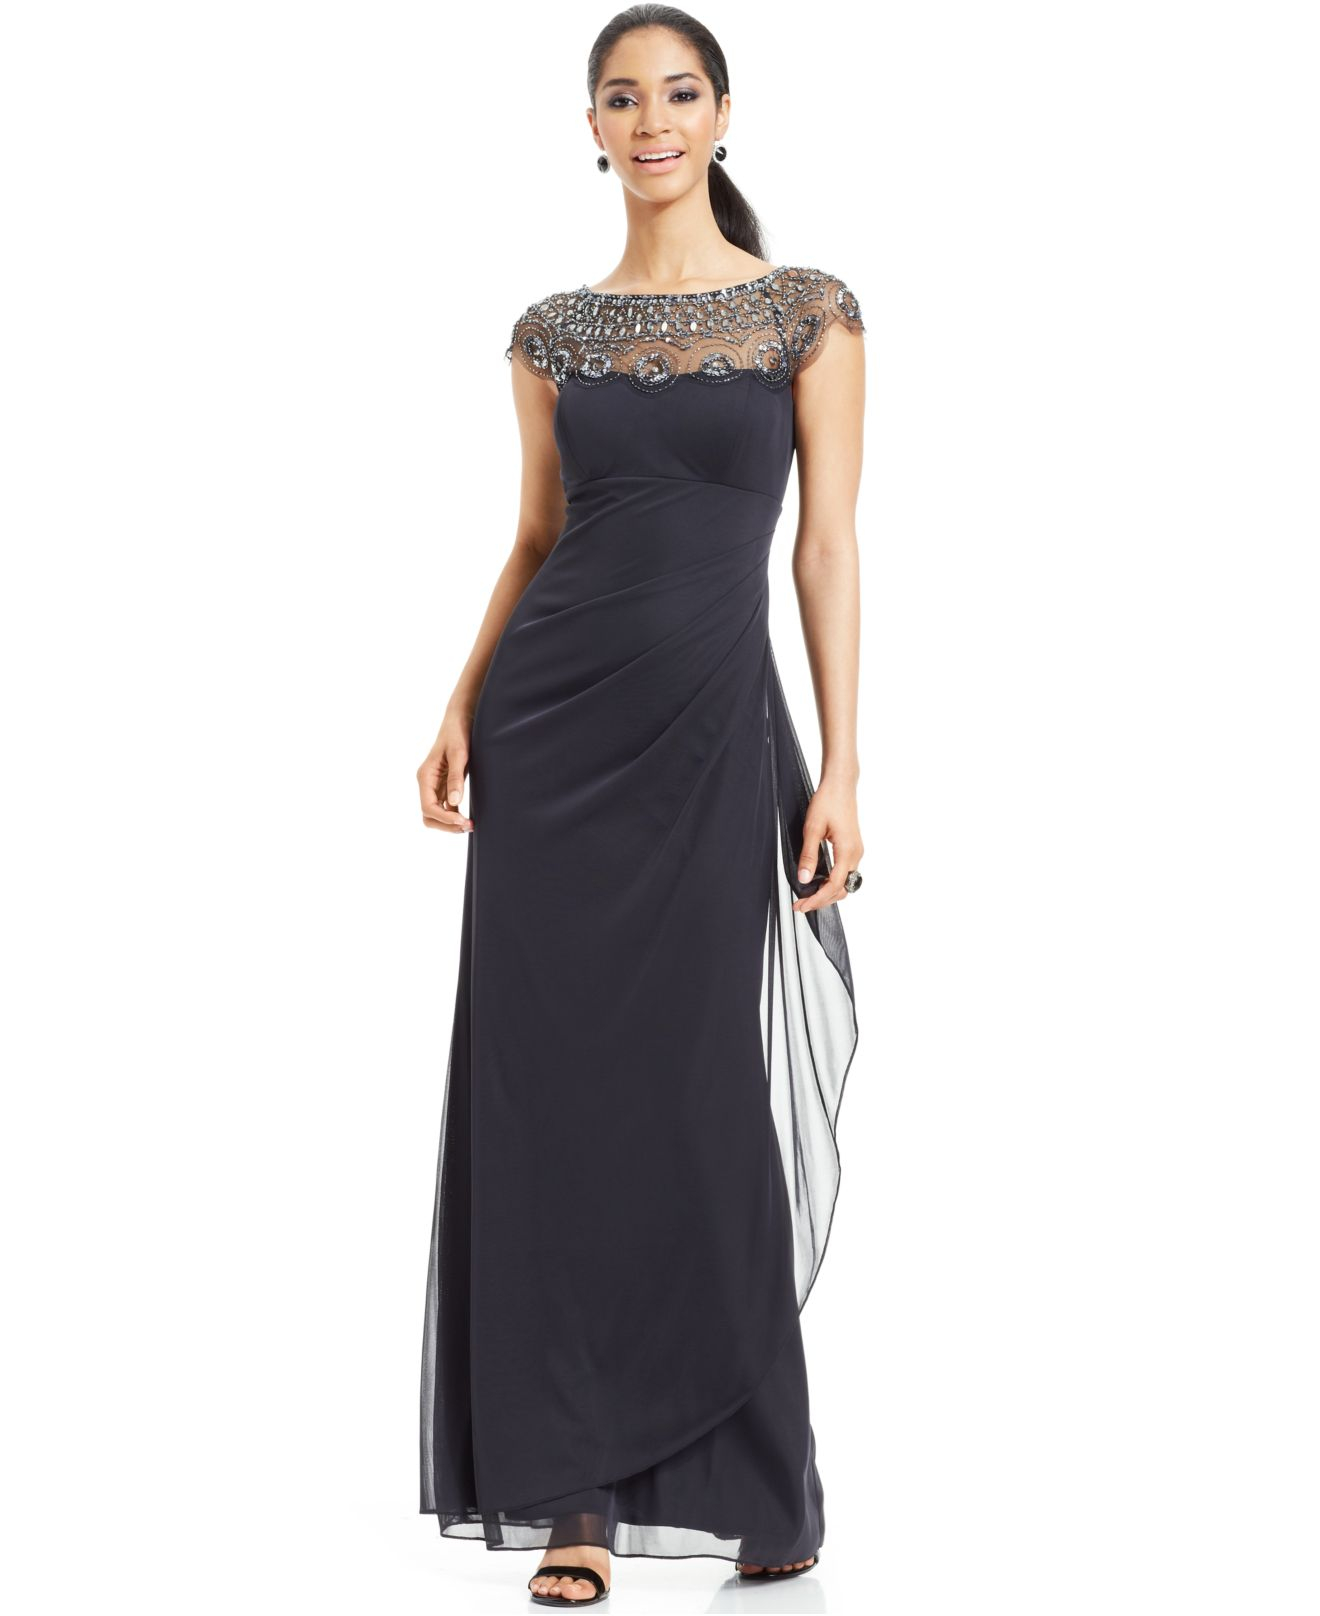 Lyst - Xscape Petite Cap-sleeve Illusion Beaded Gown in Gray